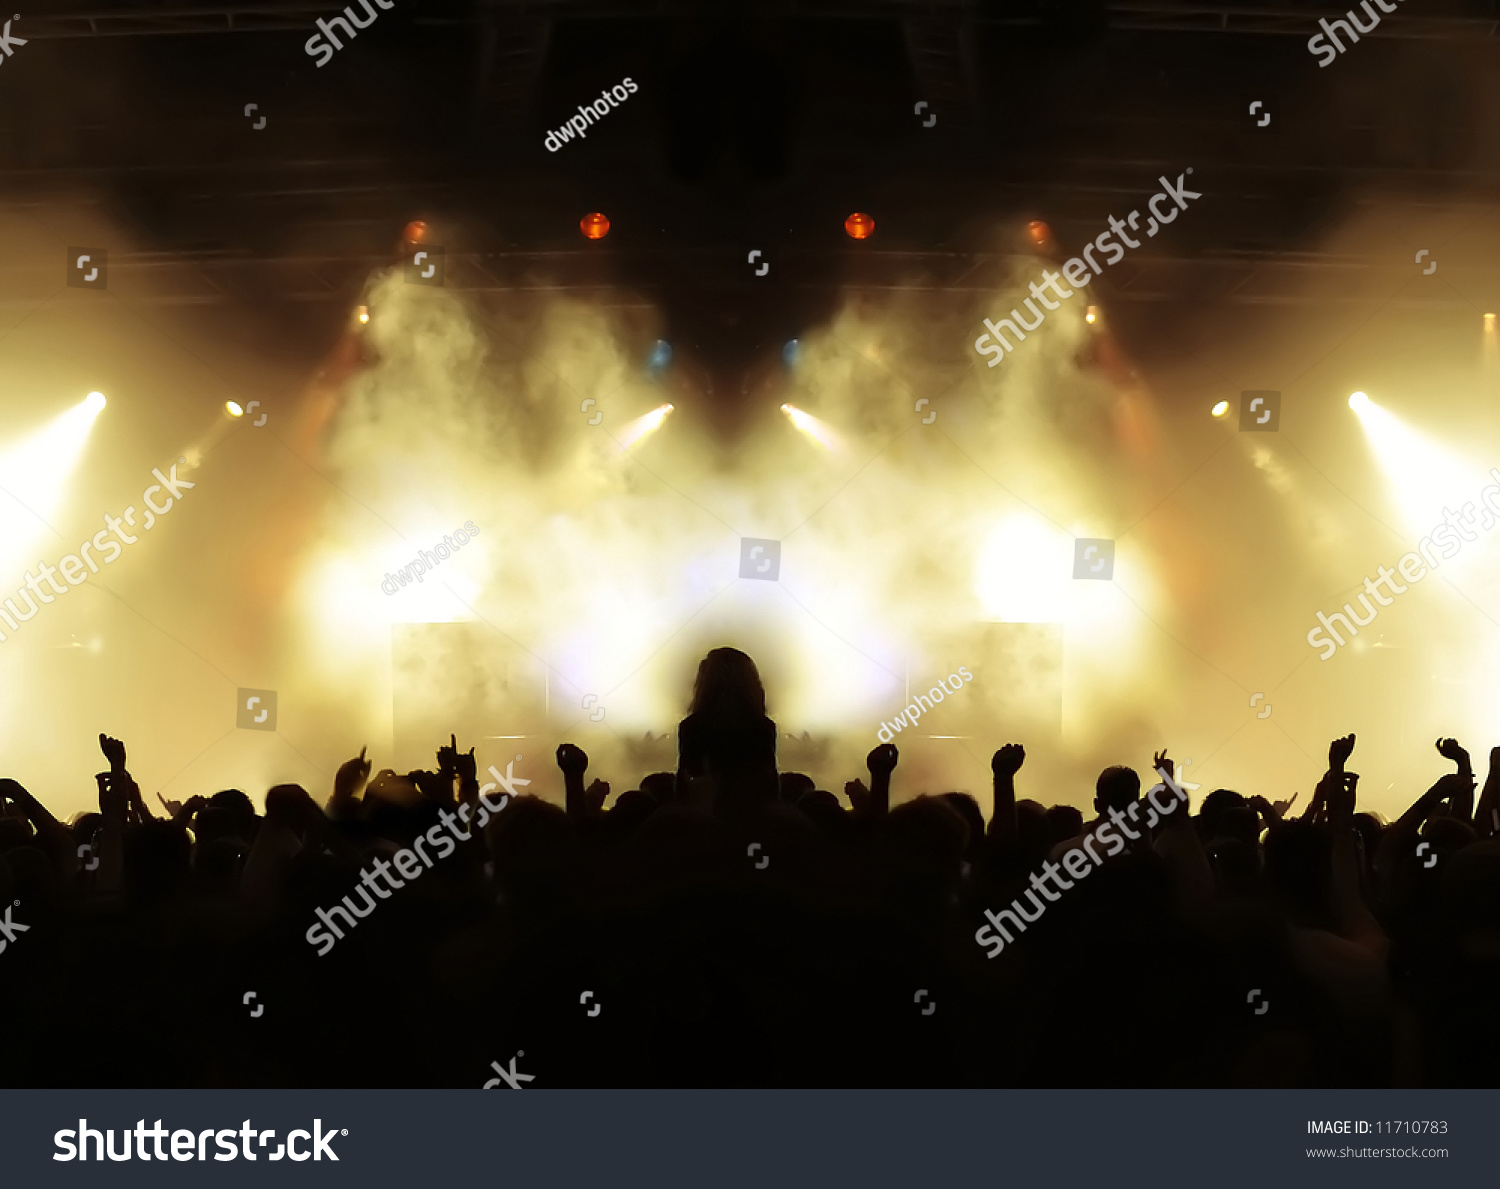 Cheering Crowd At Concert, Musicians On The Stage Stock Photo 11710783 ...